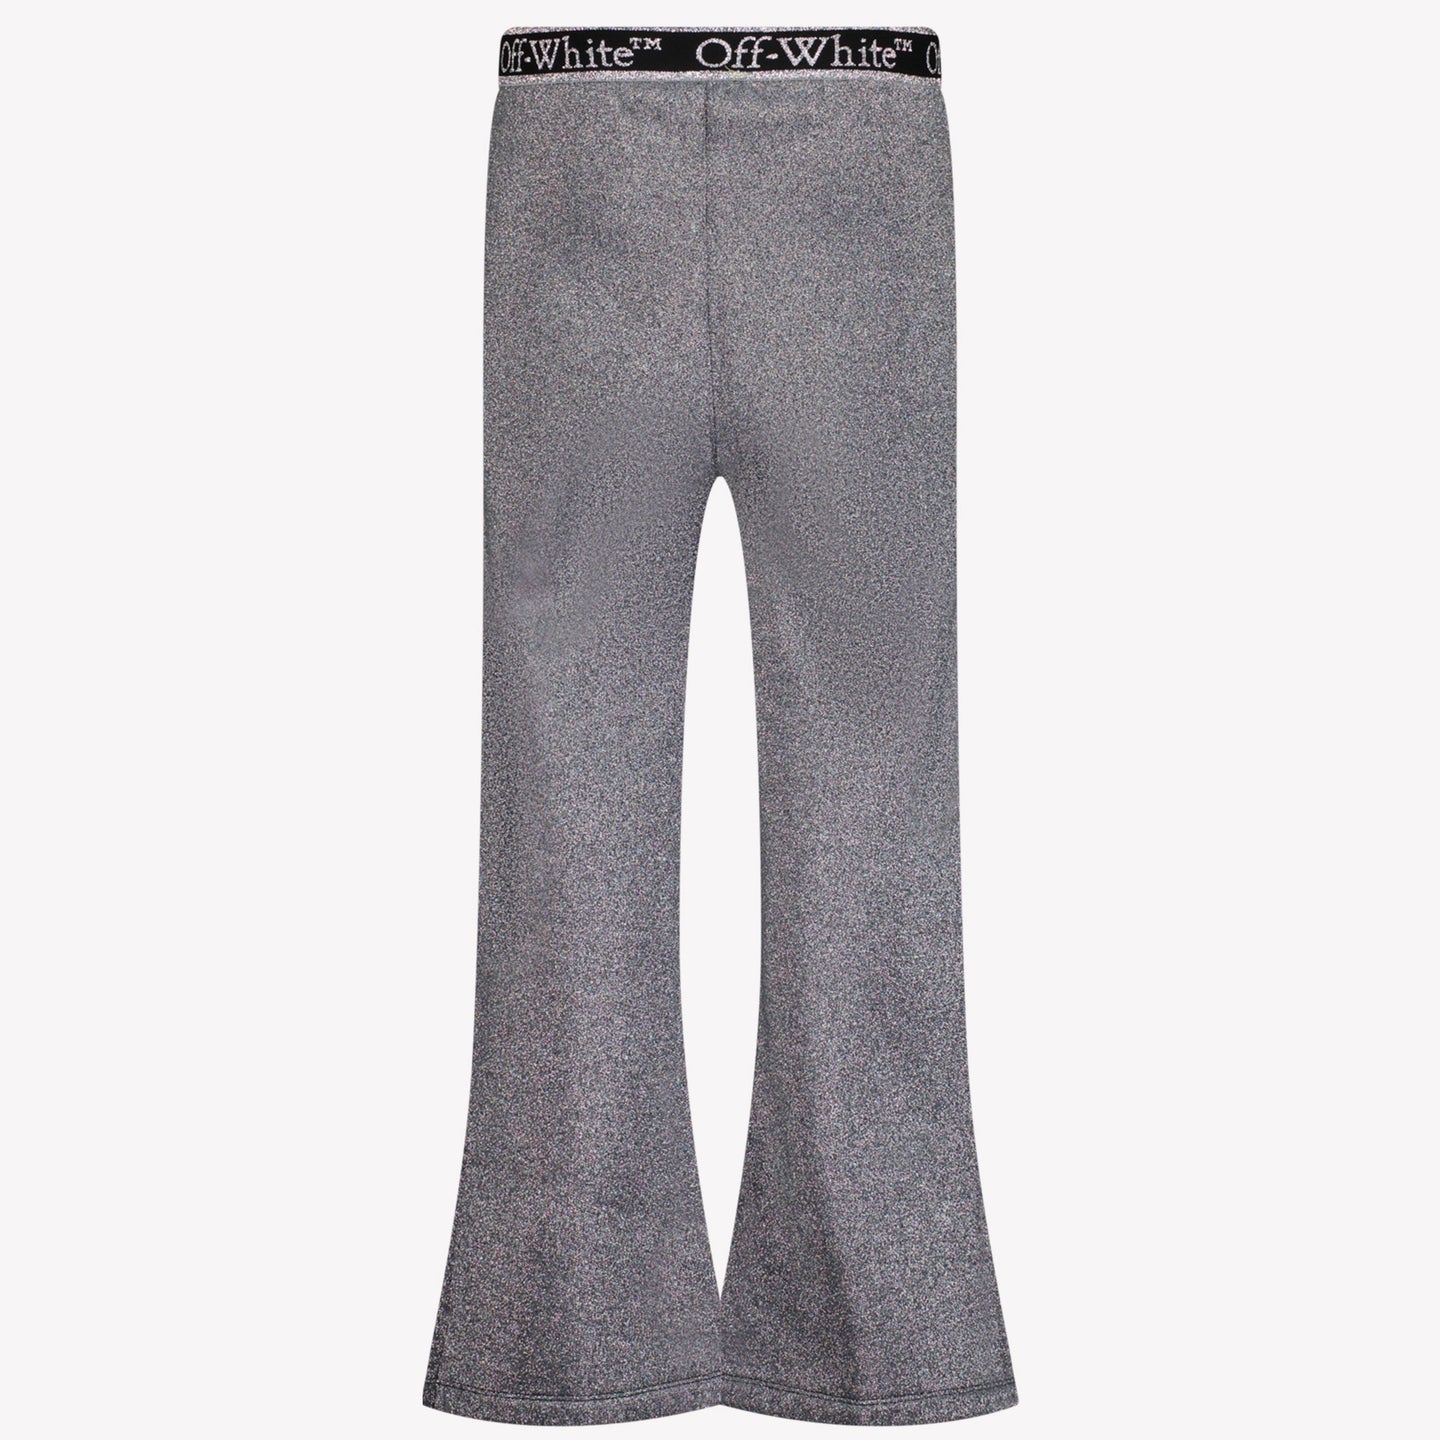 Off-White Girls Pants Silver